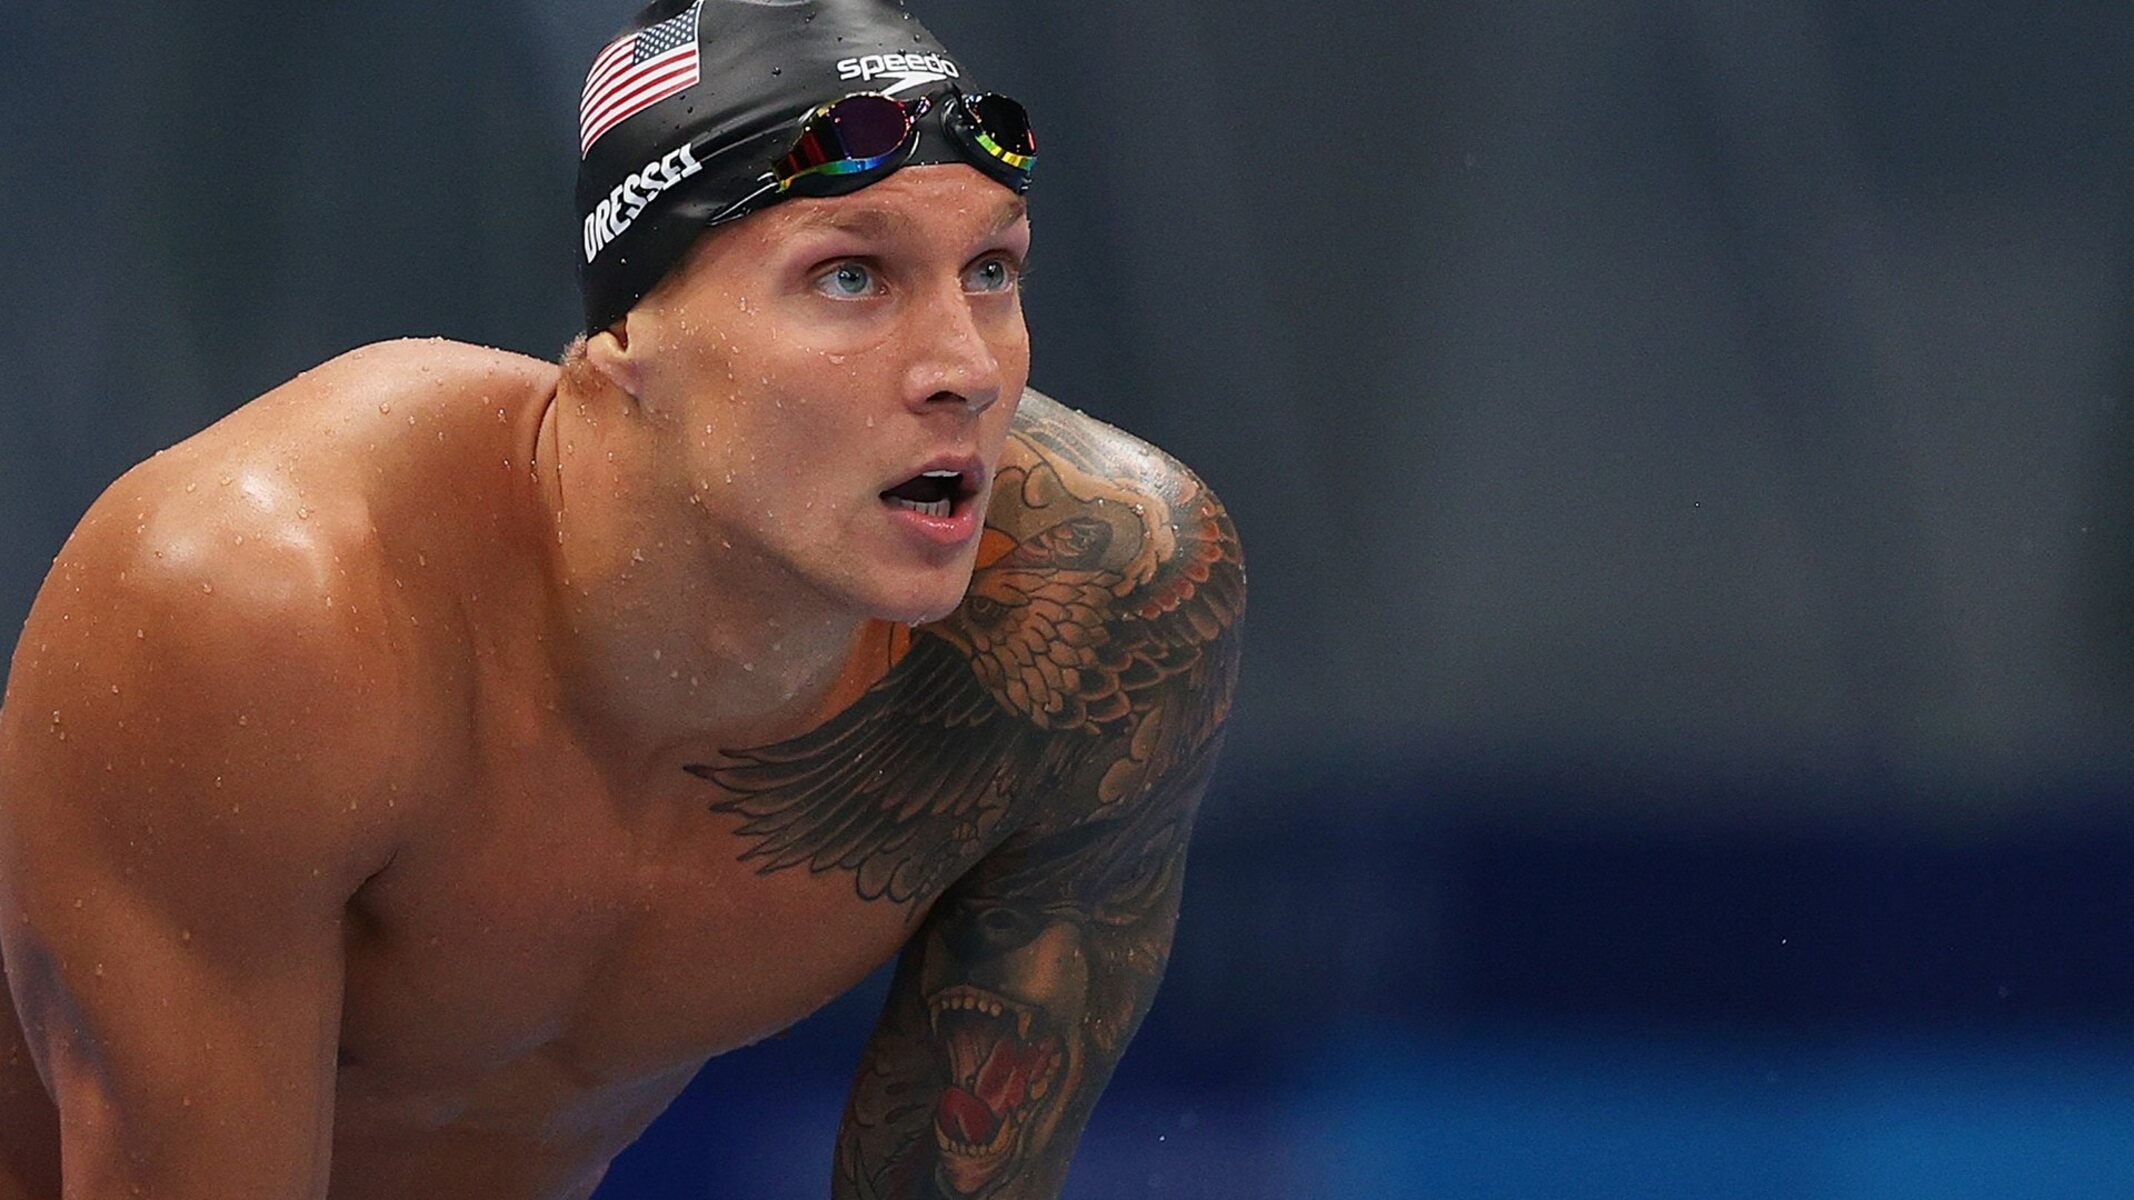 11-extraordinary-facts-about-caeleb-dressel